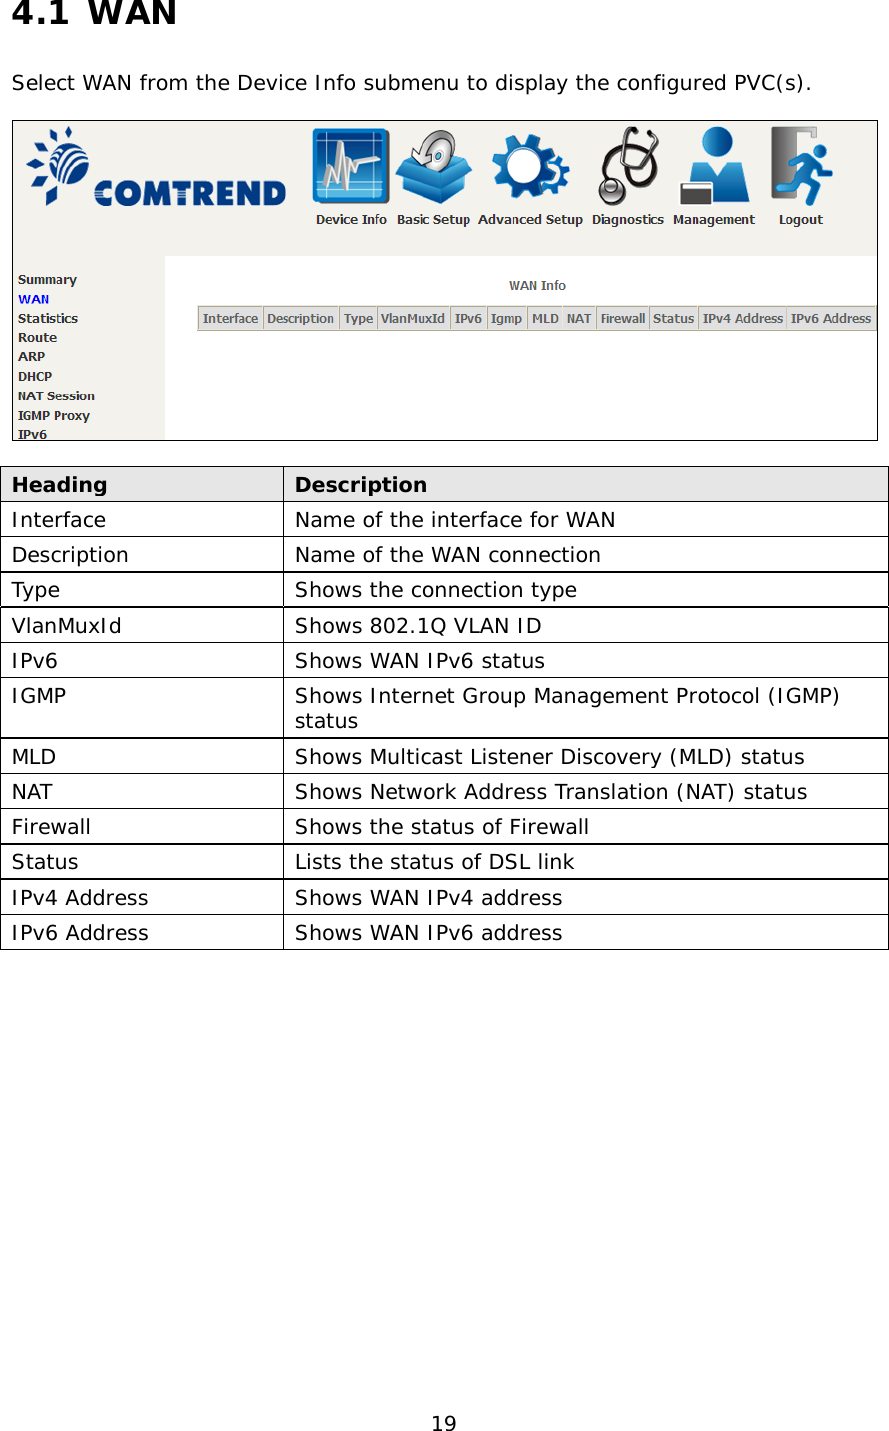  19 4.1 WAN Select WAN from the Device Info submenu to display the configured PVC(s).    Heading Description Interface  Name of the interface for WAN Description Name of the WAN connection Type Shows the connection type  VlanMuxId Shows 802.1Q VLAN ID IPv6 Shows WAN IPv6 status IGMP Shows Internet Group Management Protocol (IGMP) status MLD Shows Multicast Listener Discovery (MLD) status NAT Shows Network Address Translation (NAT) status Firewall Shows the status of Firewall Status Lists the status of DSL link IPv4 Address Shows WAN IPv4 address IPv6 Address Shows WAN IPv6 address   